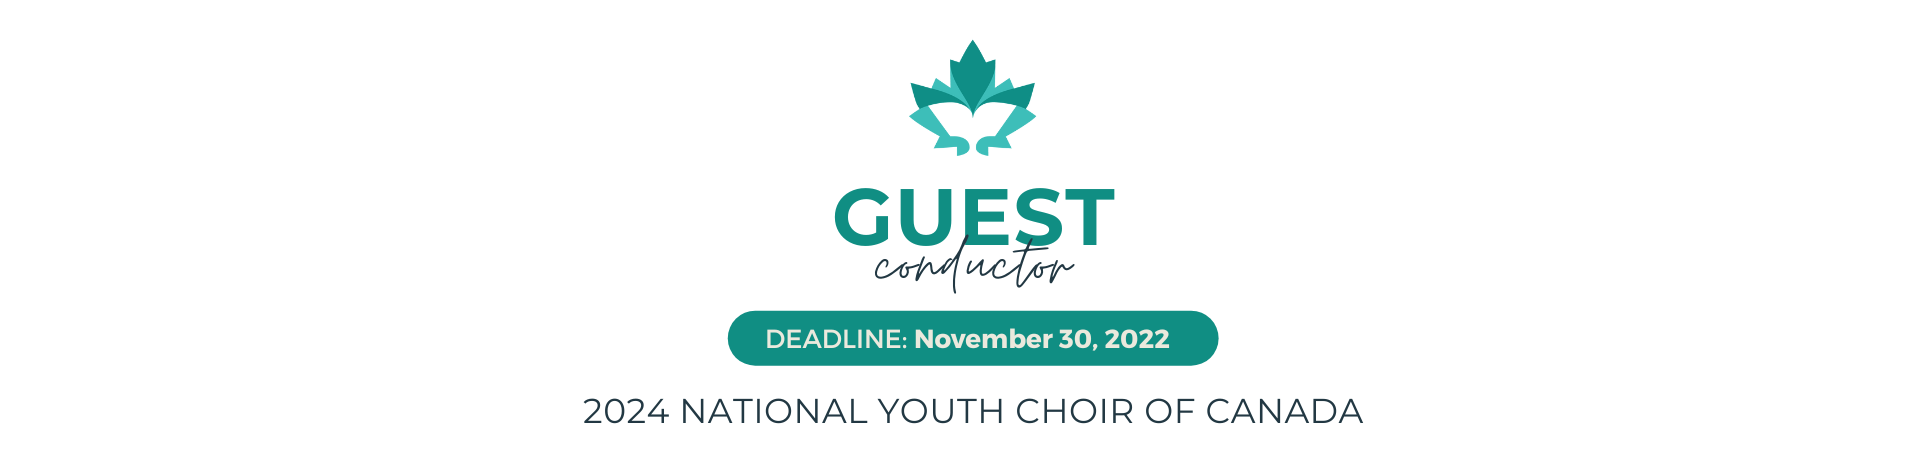 NYCC leaf logo, followed by text: Guest Conductor, deadline Nov 30, 2022 for the 2024 National Youth Choir of Canada 